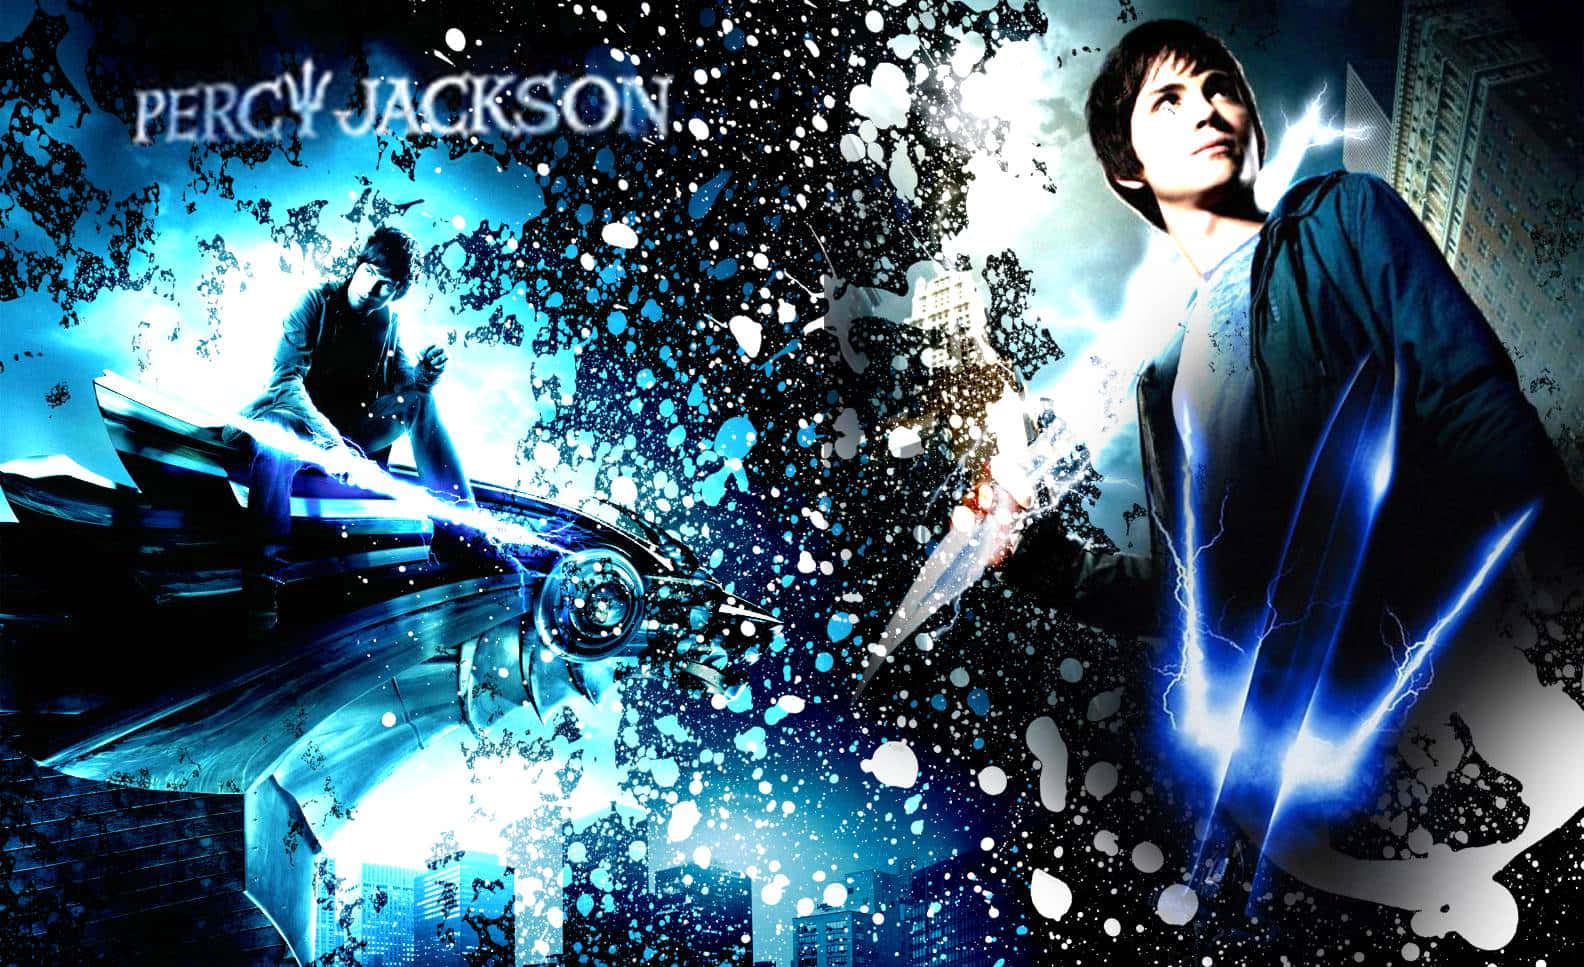 Free Percy Jackson Wallpaper Downloads, [100+] Percy Jackson Wallpapers for  FREE 